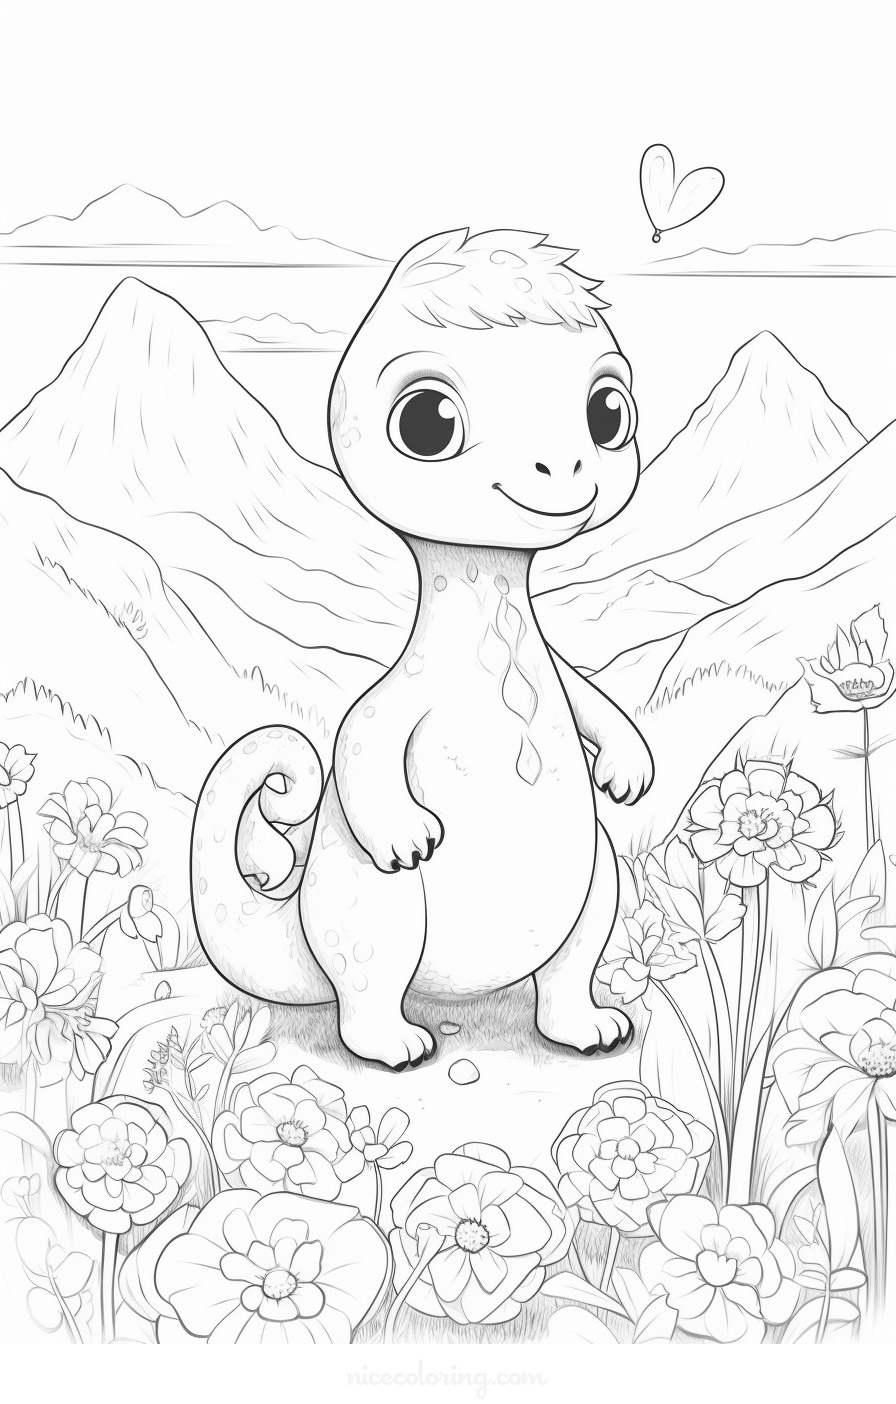 A dinosaur in a prehistoric landscape coloring